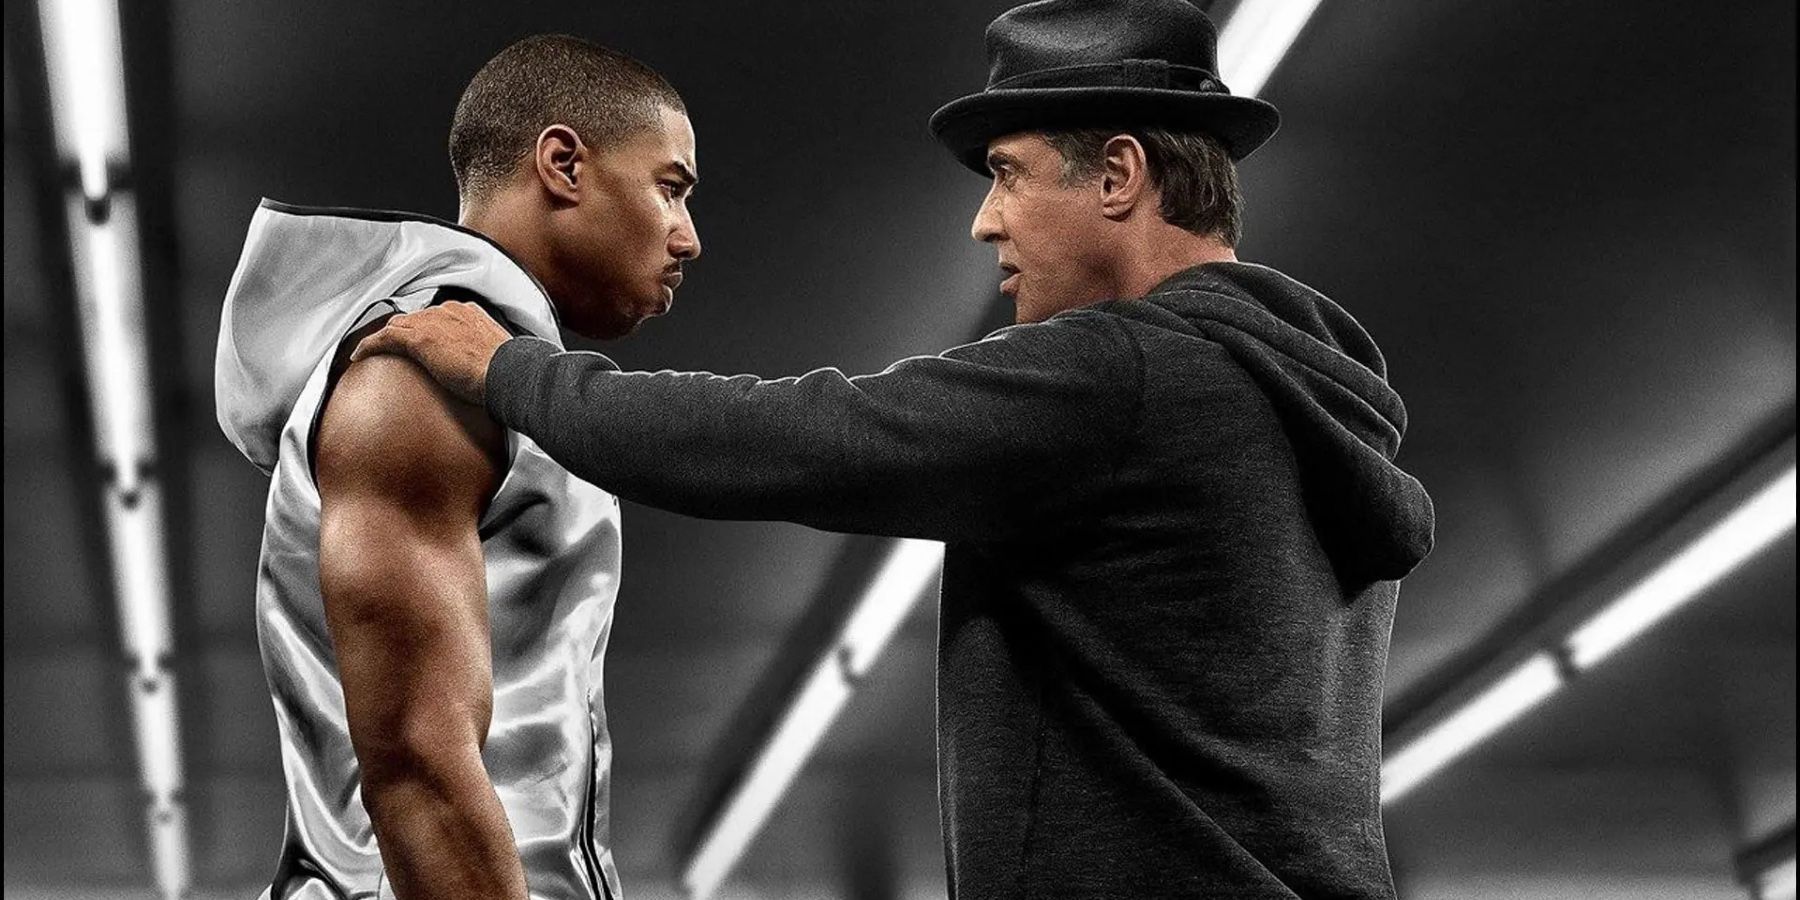 Michael-B-Jordan-and-Sylvester-Stallone-in-Creed